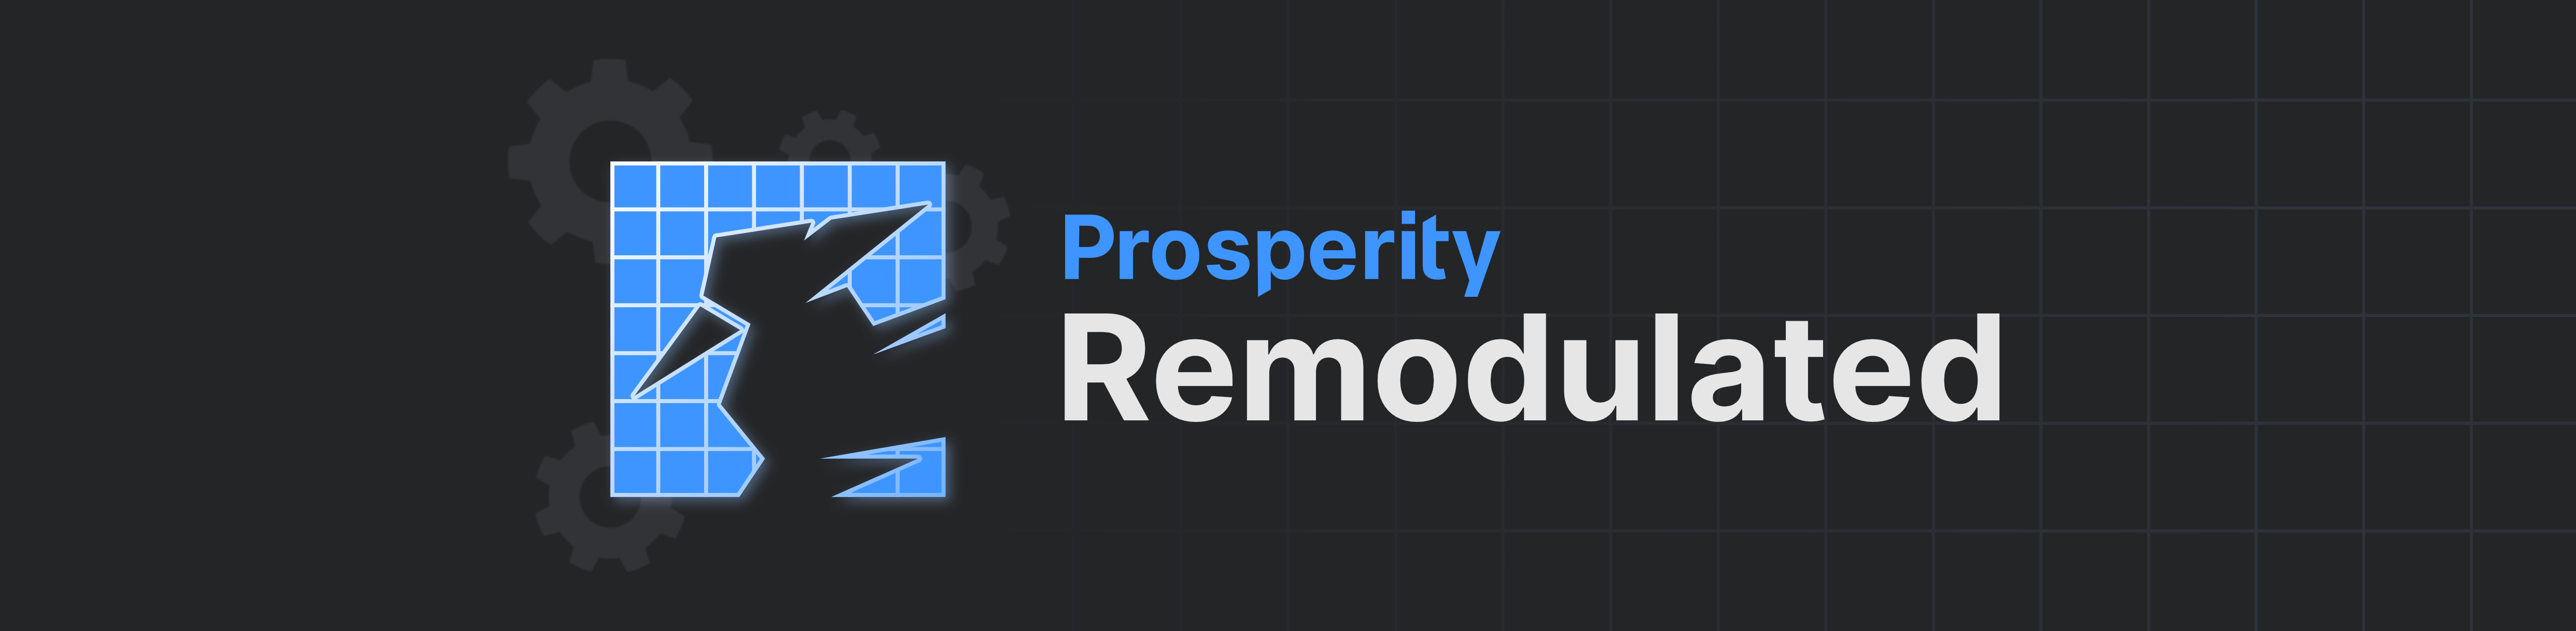 Remodulated Banner